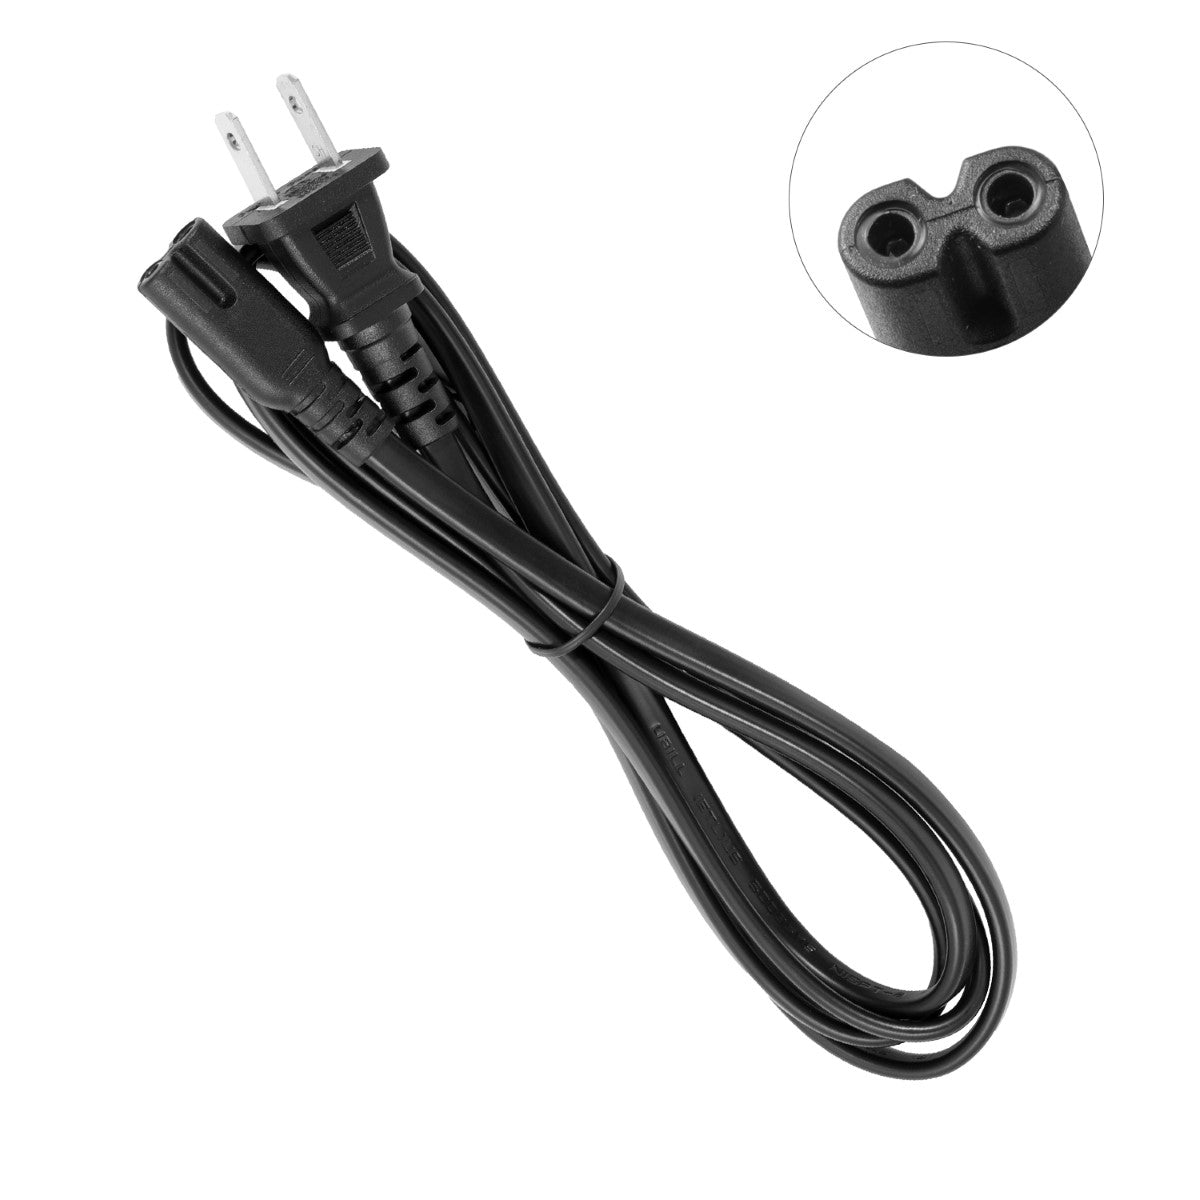 Power Cord for HP ENVY 5665 e-All-in-One Printer.